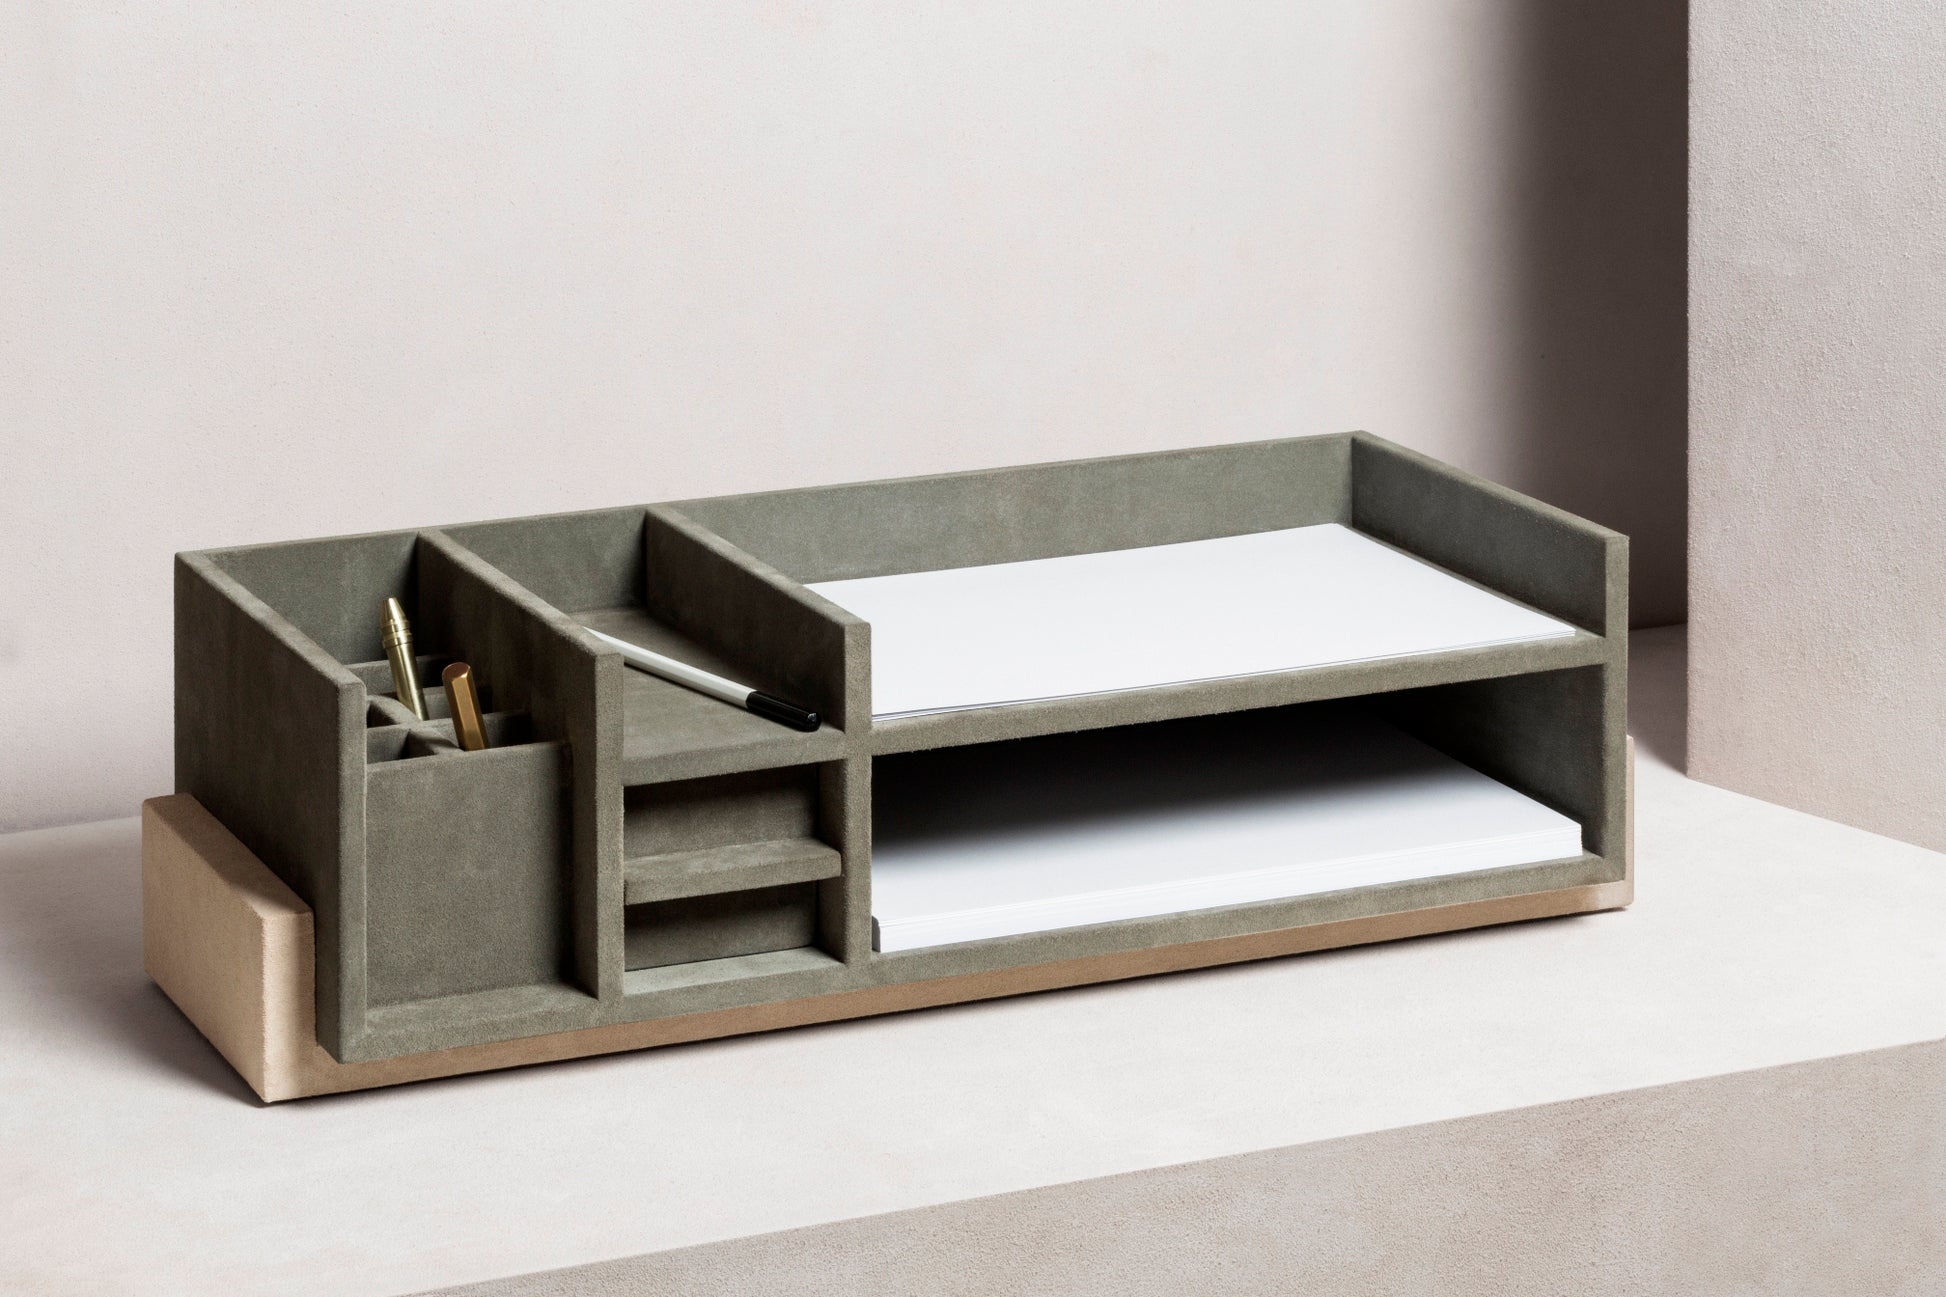 Giobagnara x Stéphane Parmentier Personal Assistant Desk Organizer | Miniature Architectural Structure | Essential Design | Keep Desk Clean & Organized | Adds Unique Style | Elegant & Functional Office Accessory | Suitable for Refined Living & Business Ambiences | Available at 2Jour Concierge, #1 luxury high-end gift & lifestyle shop